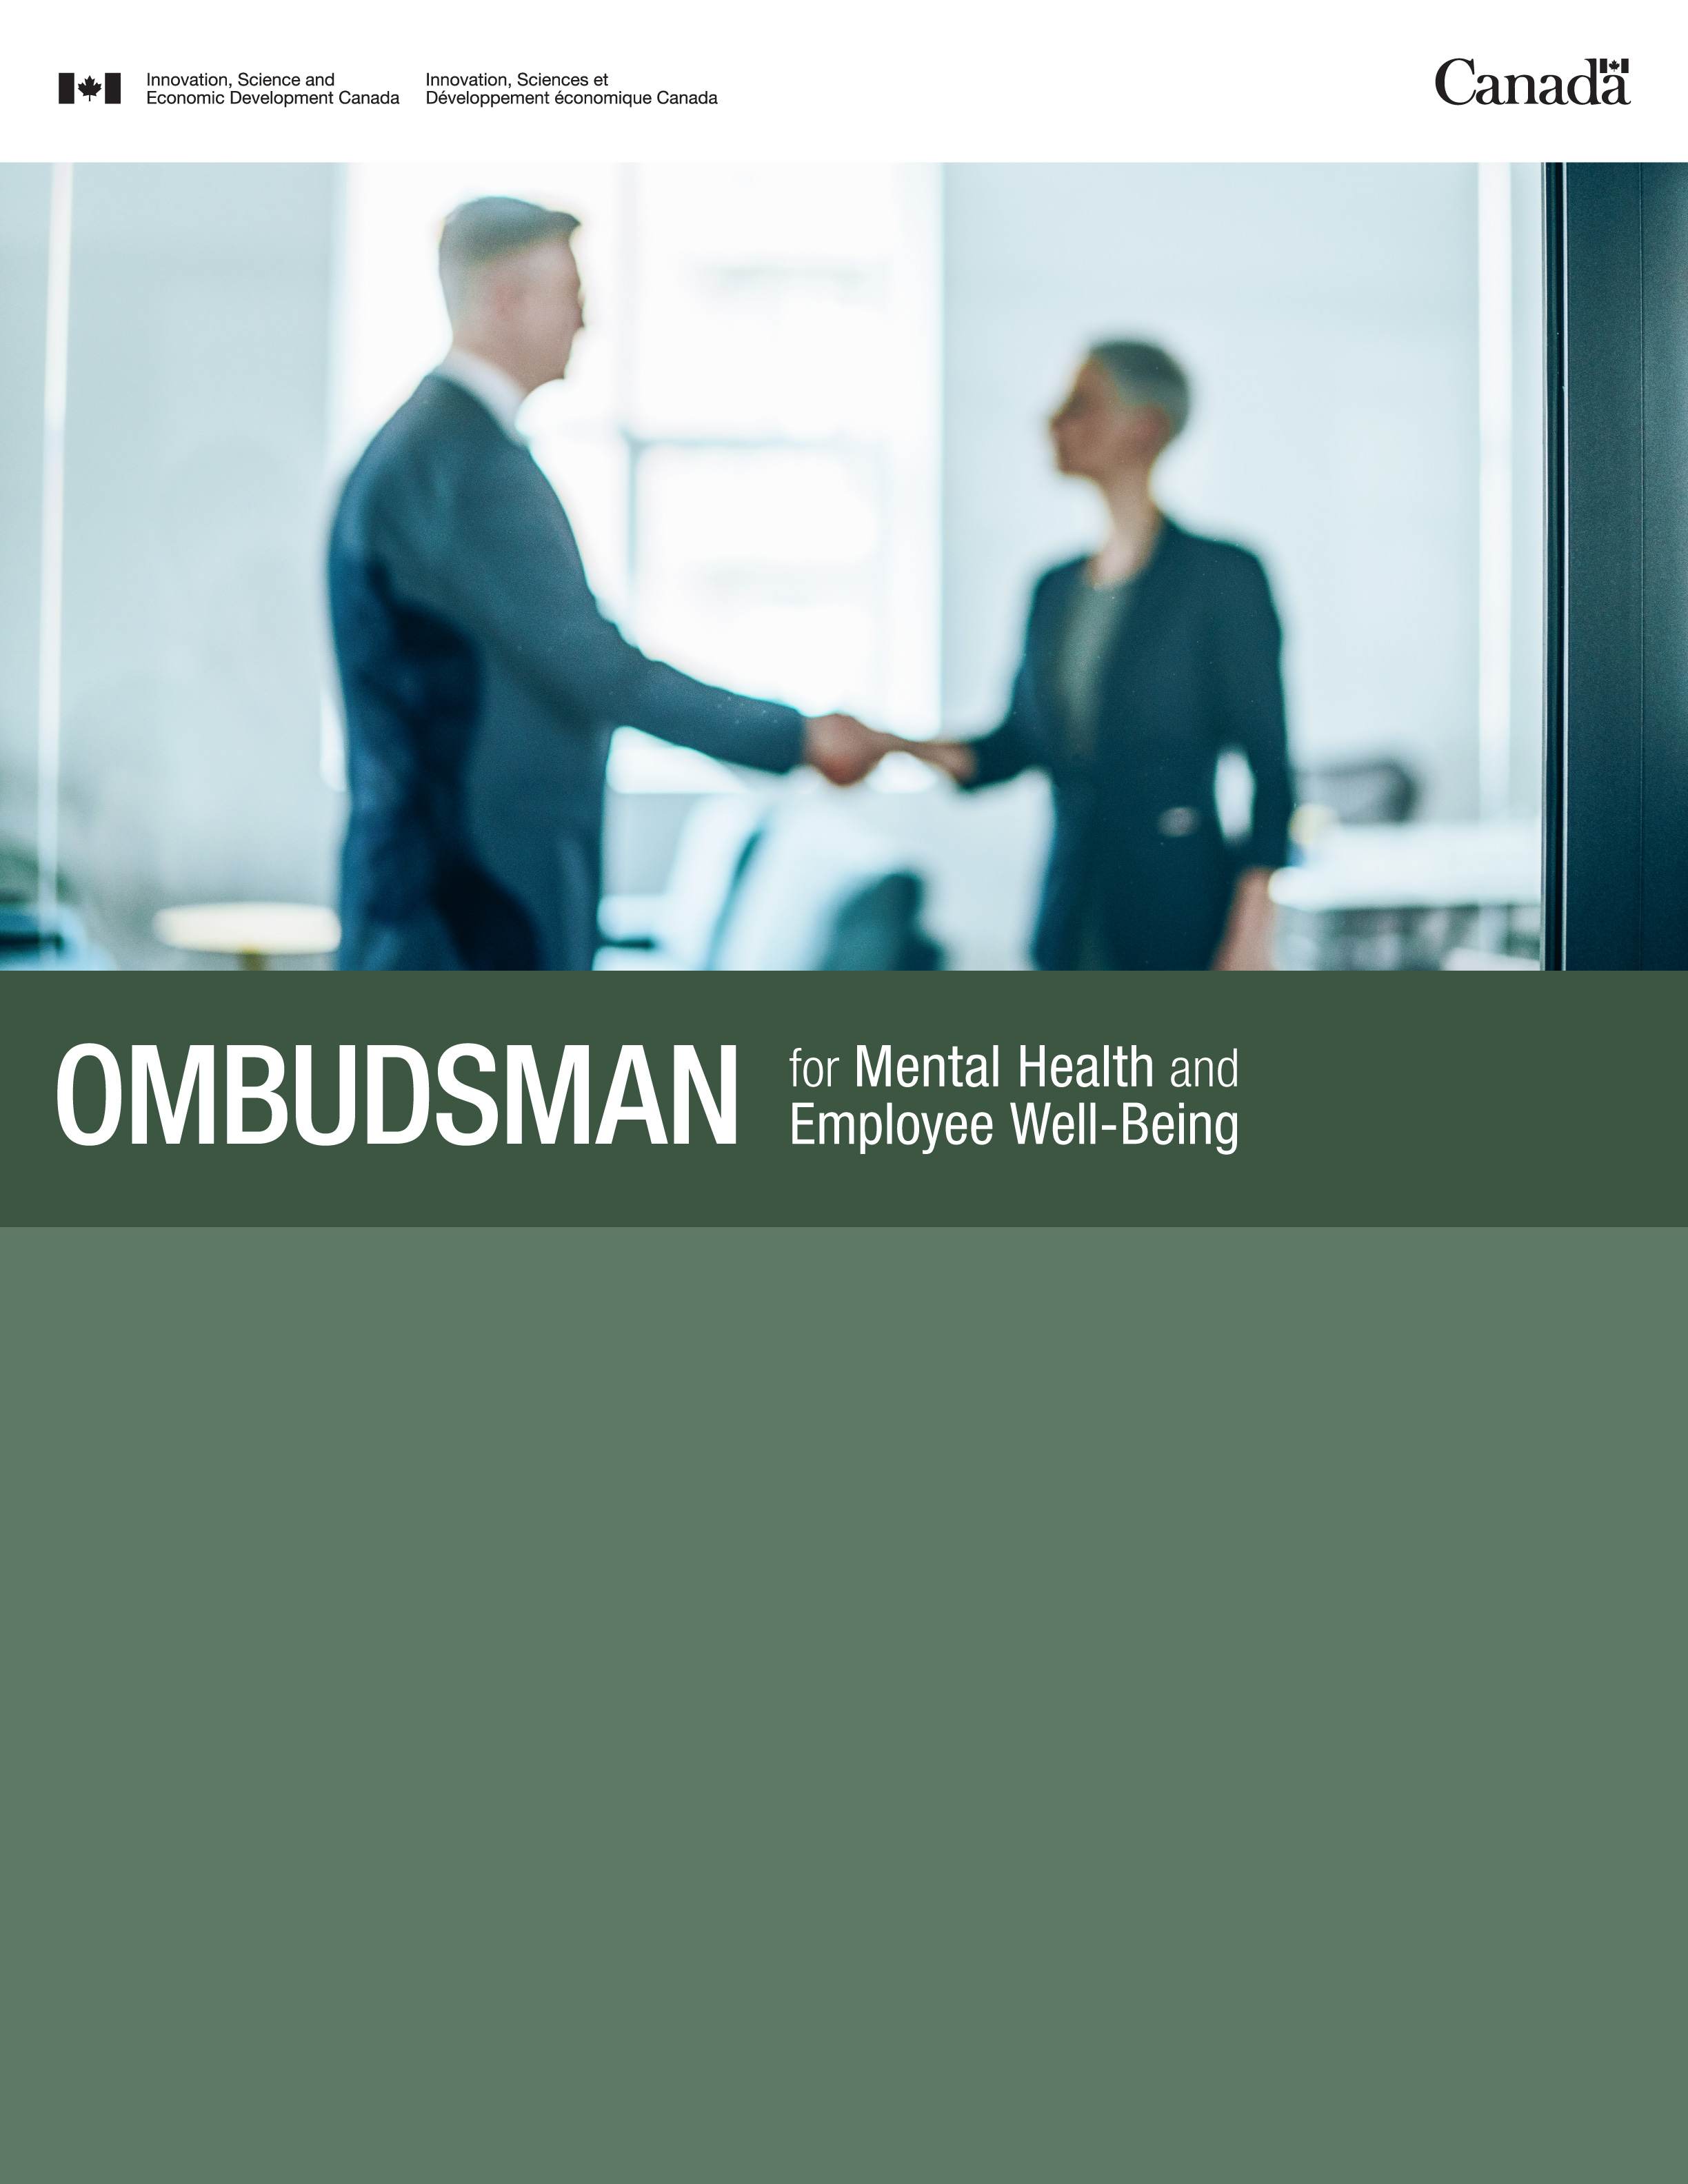 The Office of the Ombudsman for Mental Health and Employee Well-Being